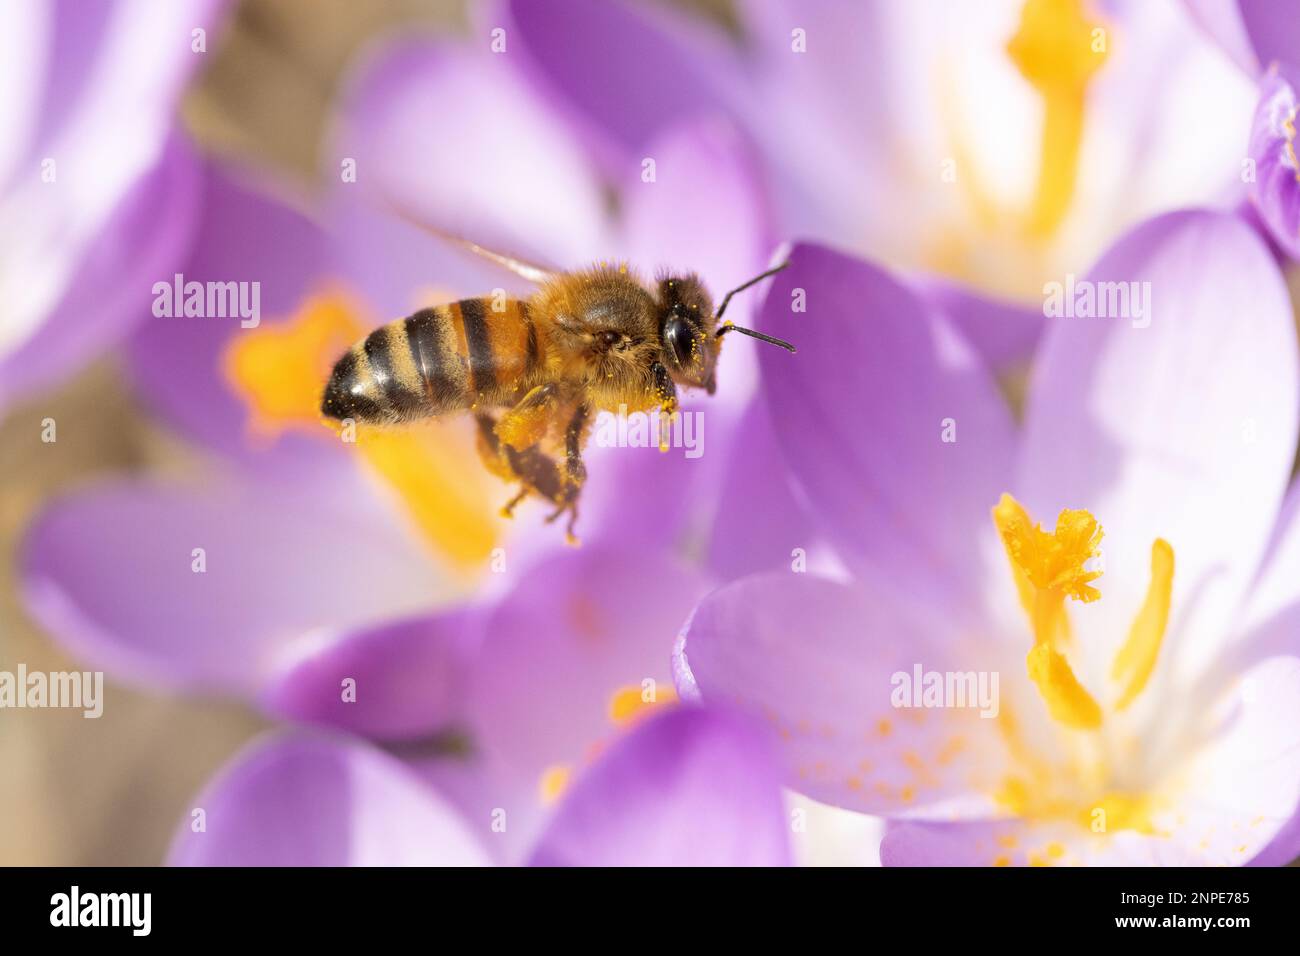 Honey bee worker about to land on crocus tommasinianus Barr’s Purple flower, carrying a dusting of pollen grains. Stock Photo